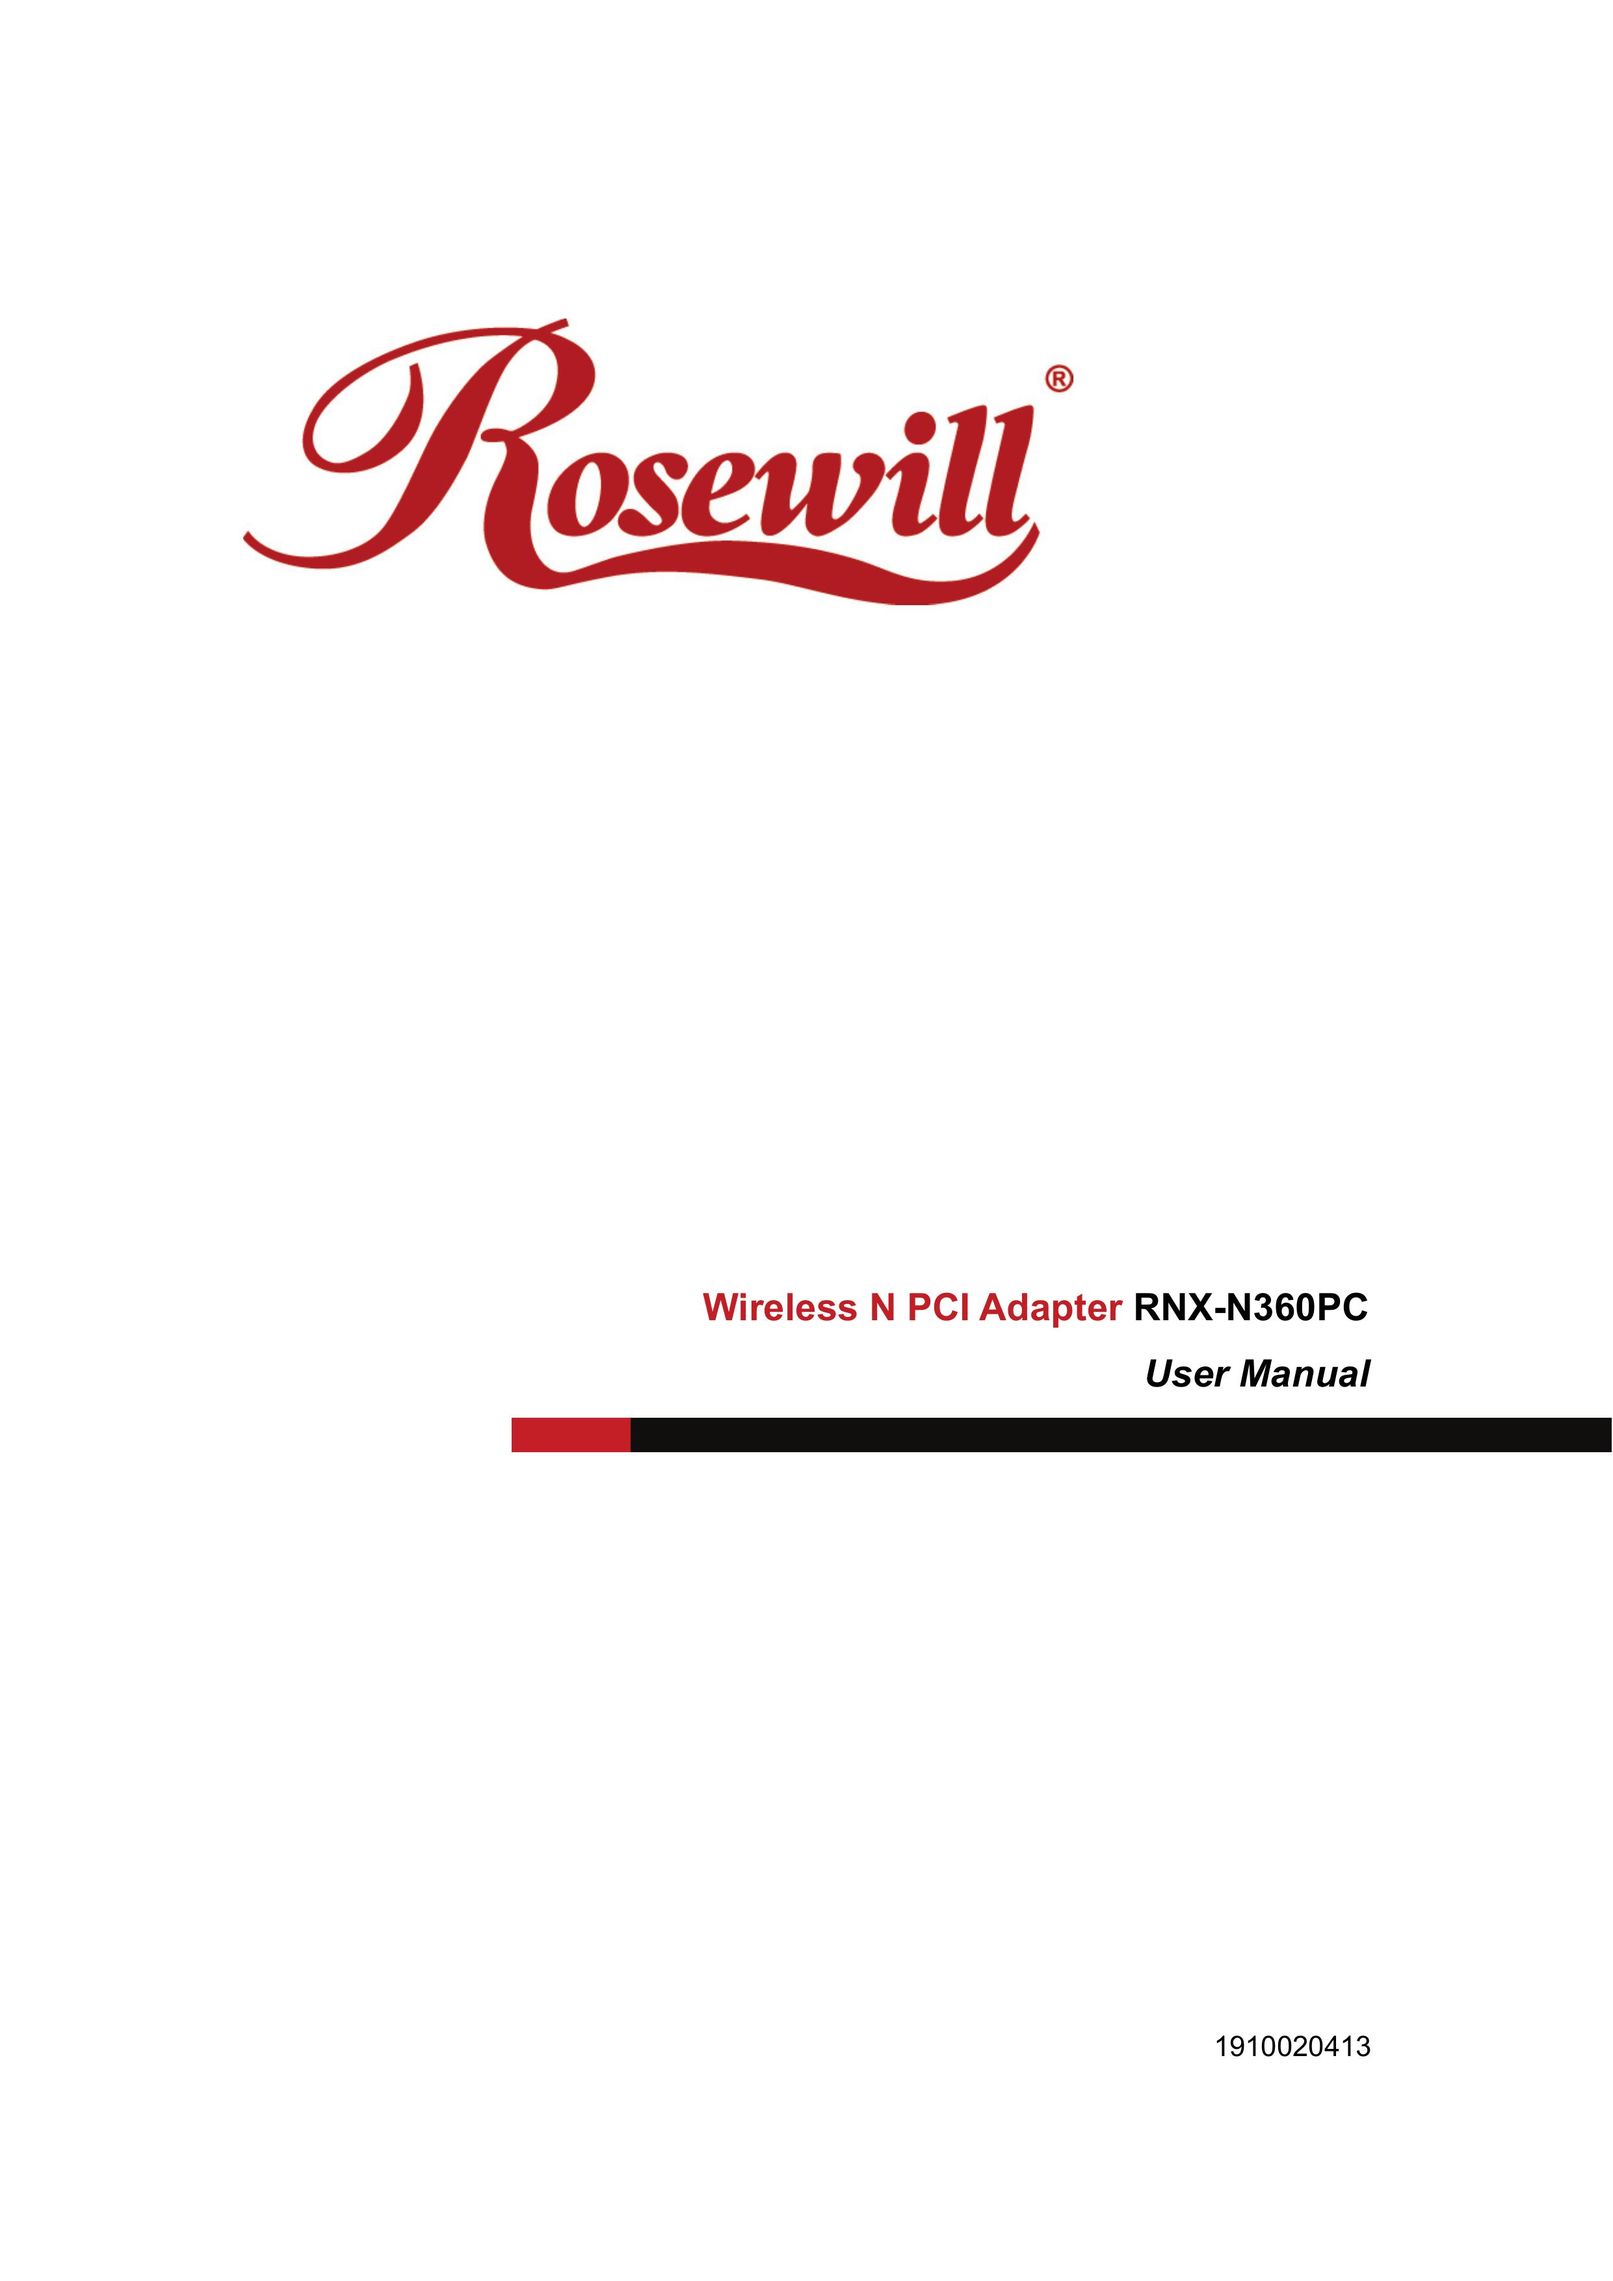 Rosewill RNX-N360PC Computer Hardware User Manual